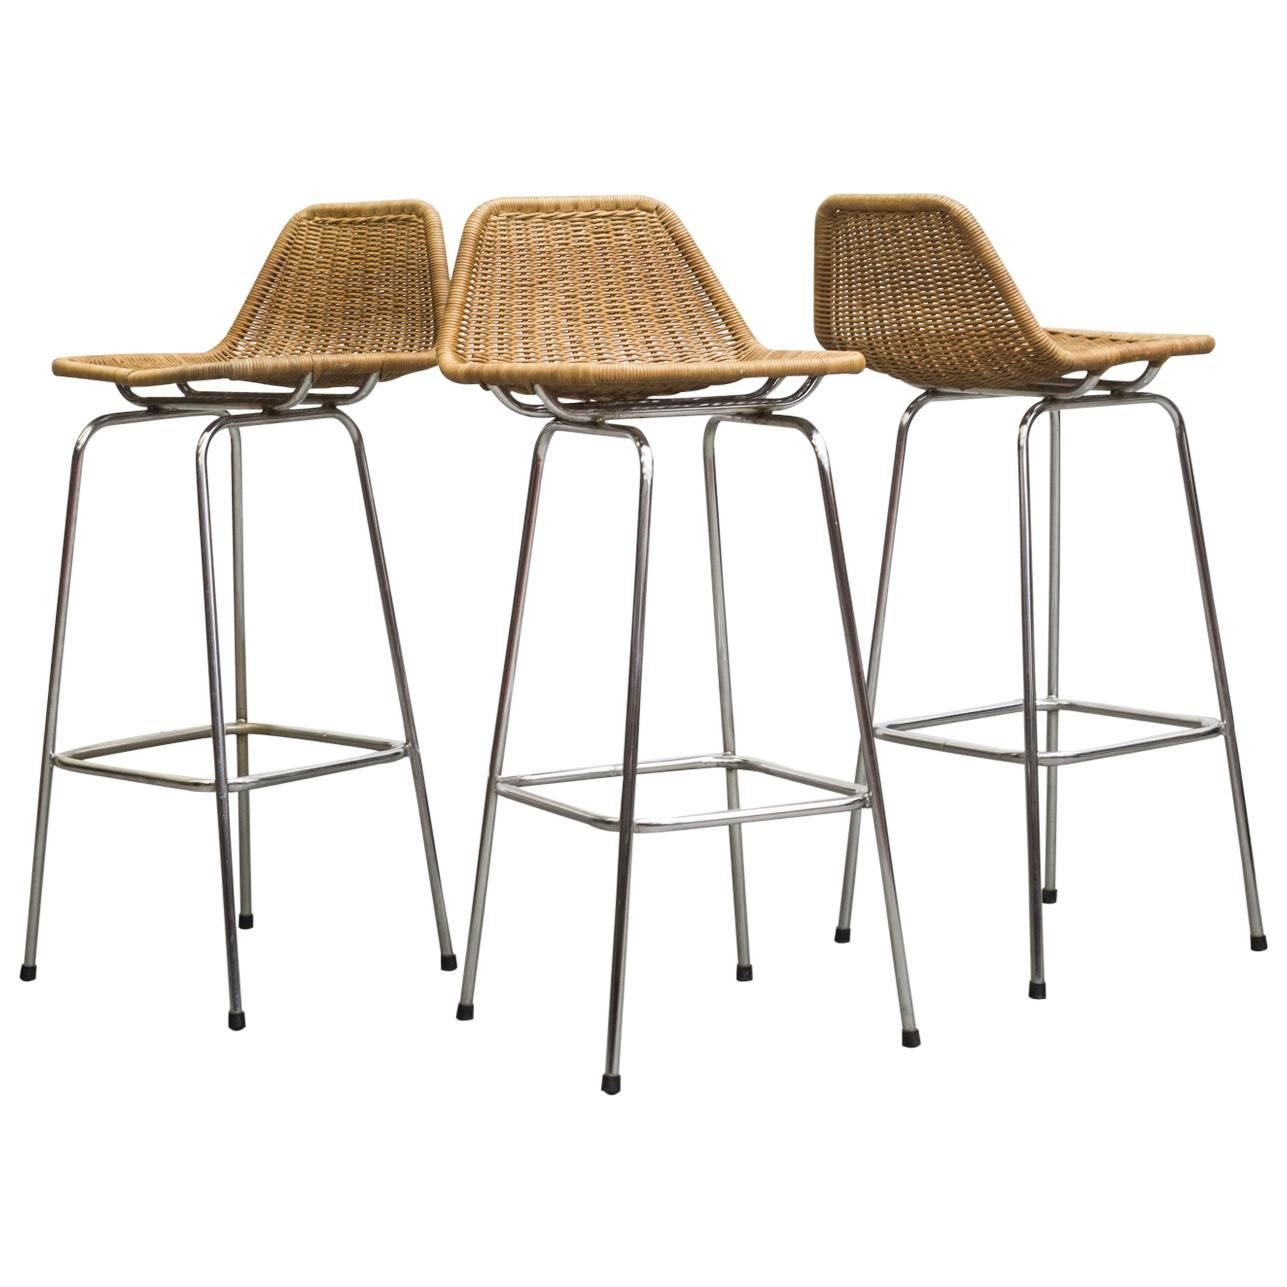 Set of Three Charlotte Perriand Style Rattan and Chrome Bar Stools